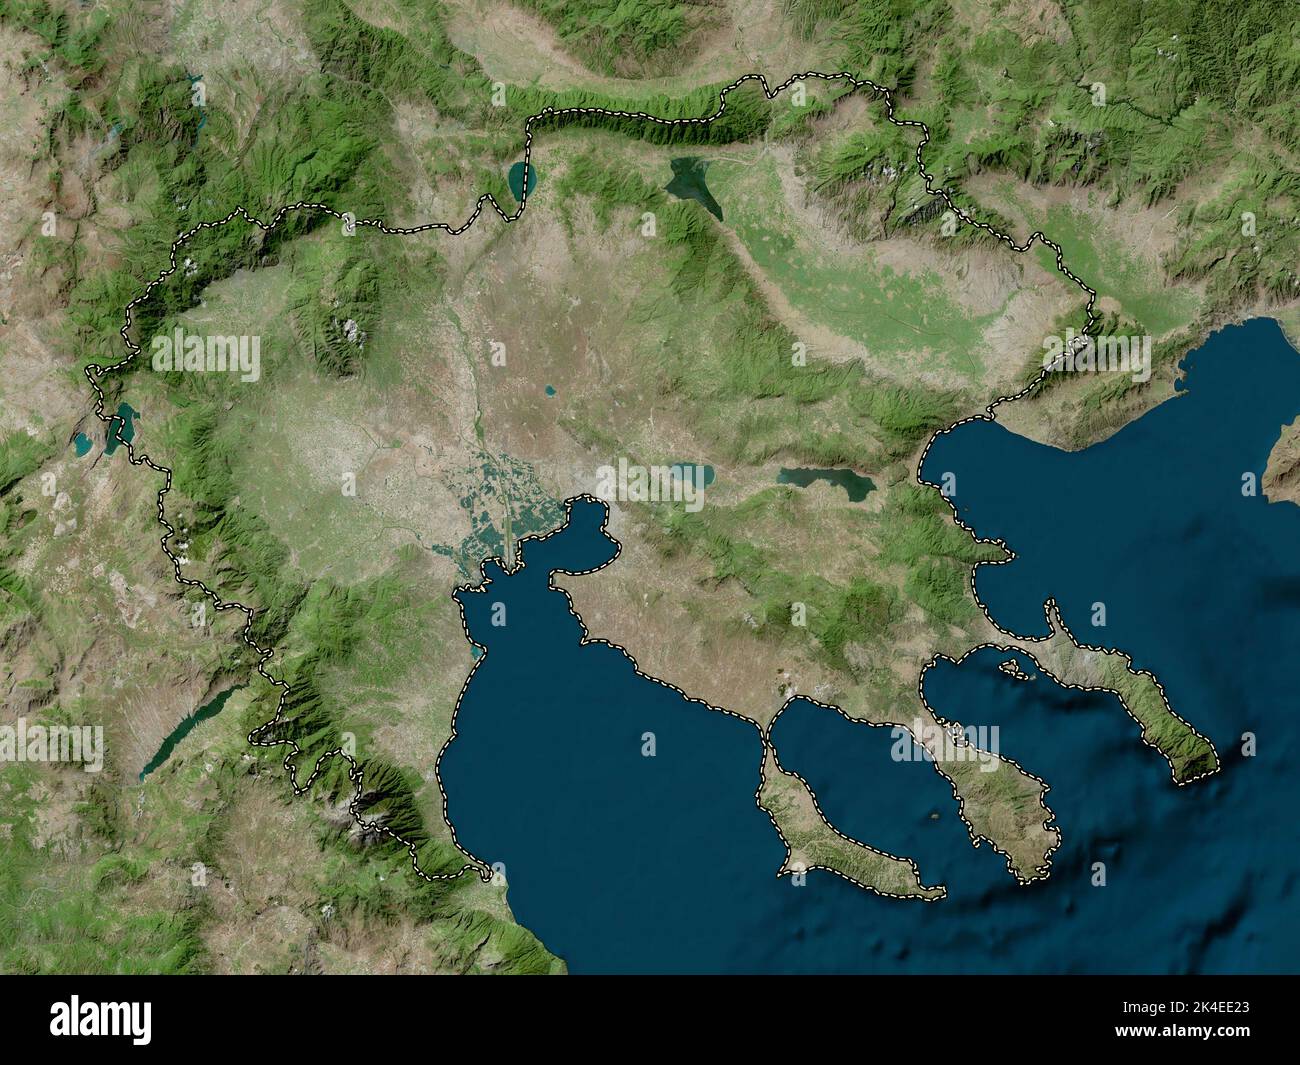 Central Macedonia, decentralized administration of Greece. High resolution satellite map Stock Photo